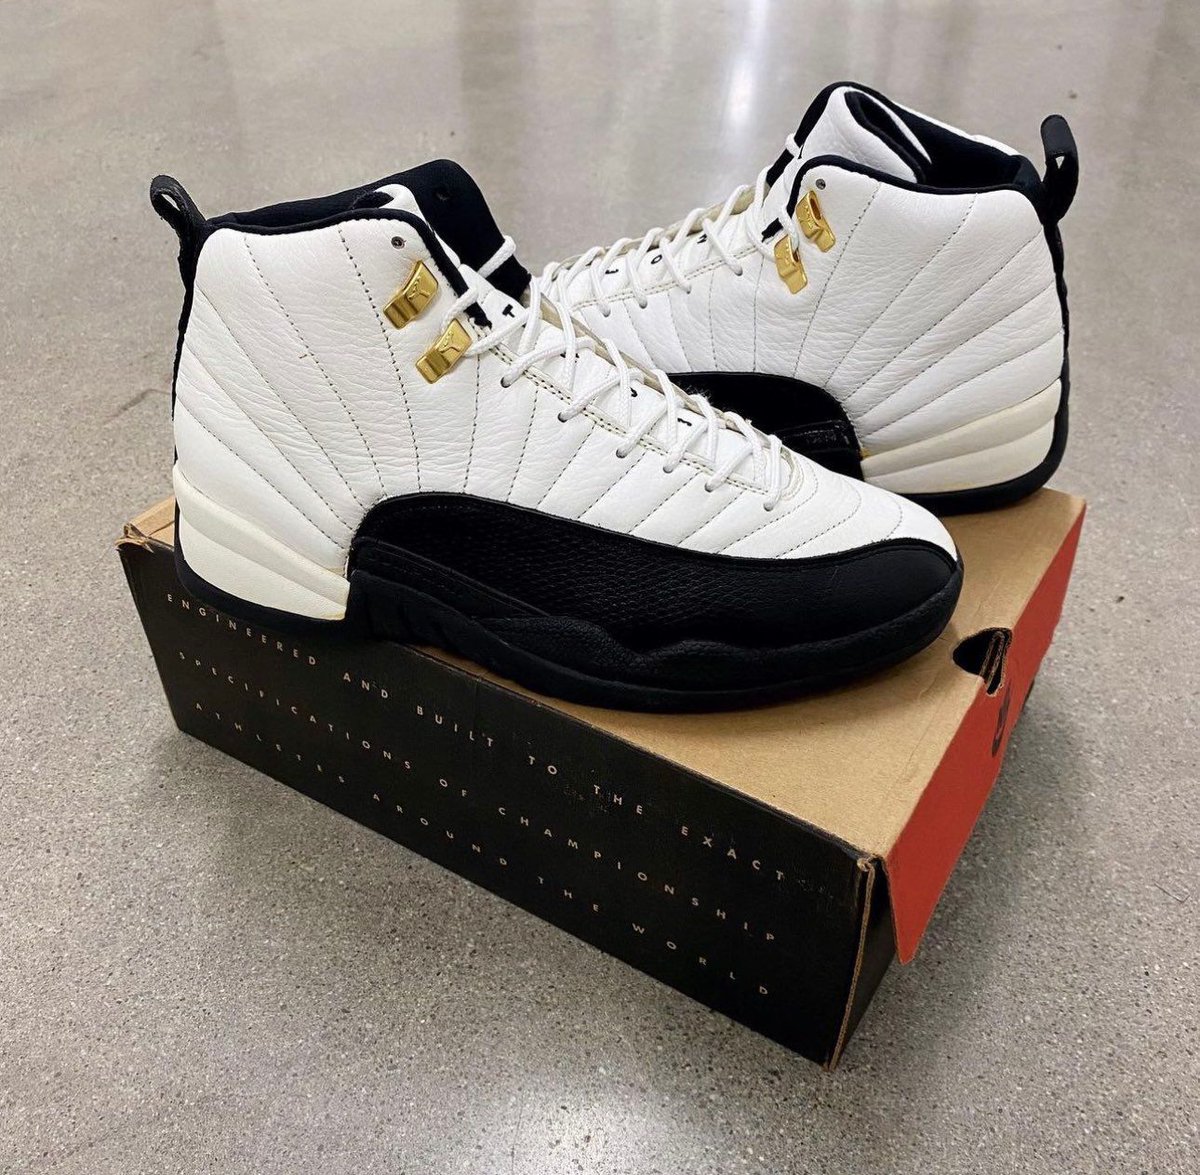 Air Jordan 12 OG “Taxi” 🚕 Time for another retro?